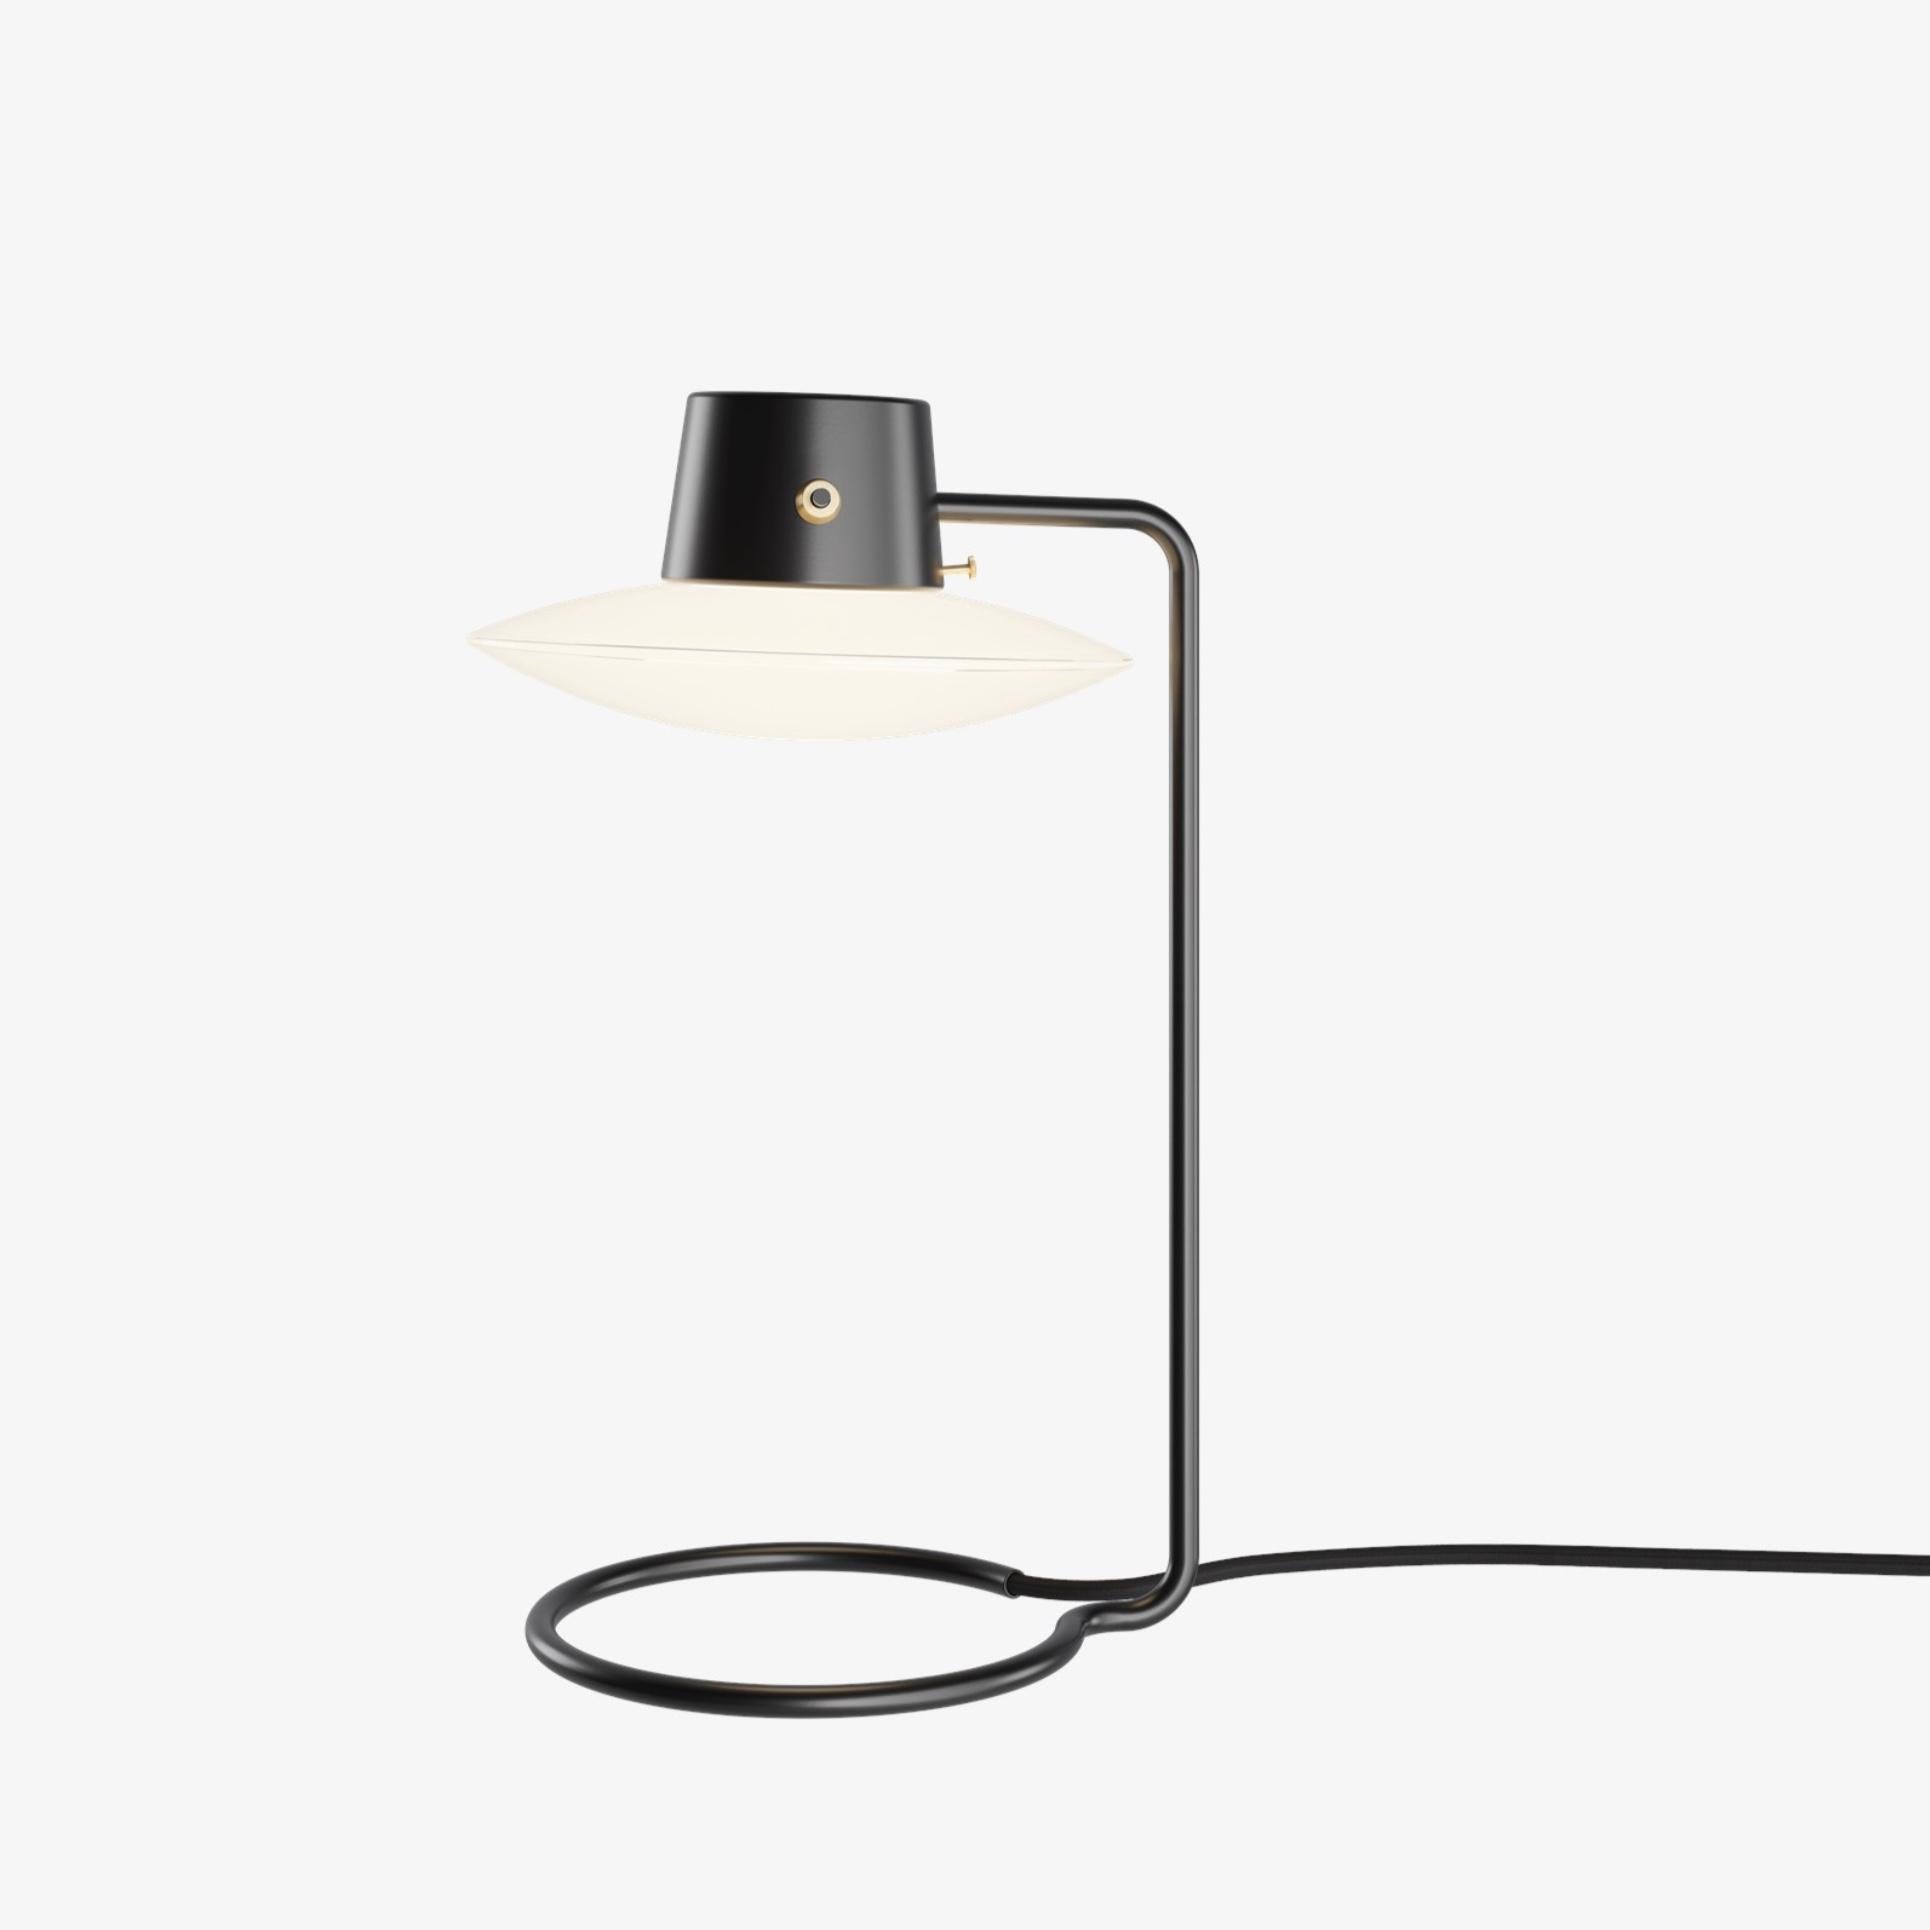 Arne Jacobsen AJ Oxford Table Lamp with Metal Shade for Louis Poulsen, 1963 In New Condition For Sale In Tilburg, NL